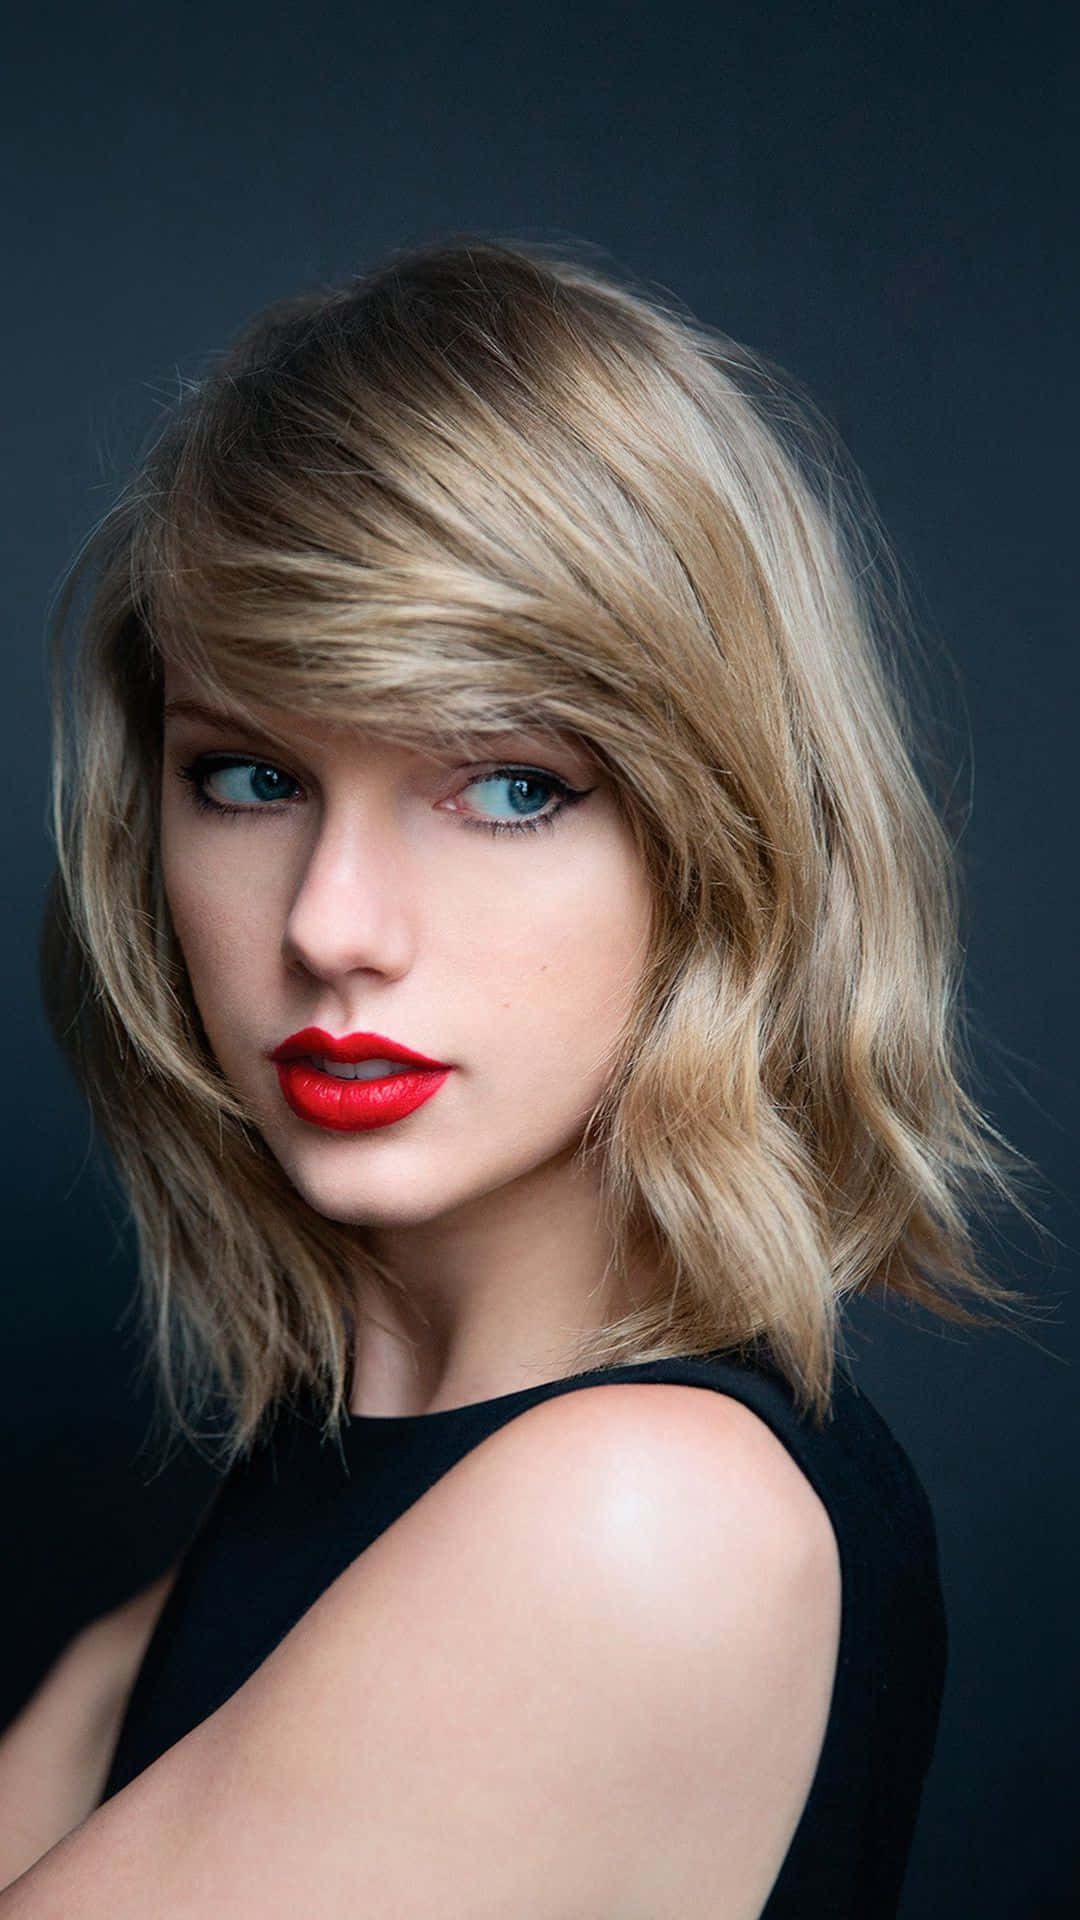 Short-Haired Taylor Swift iPhone Wallpaper